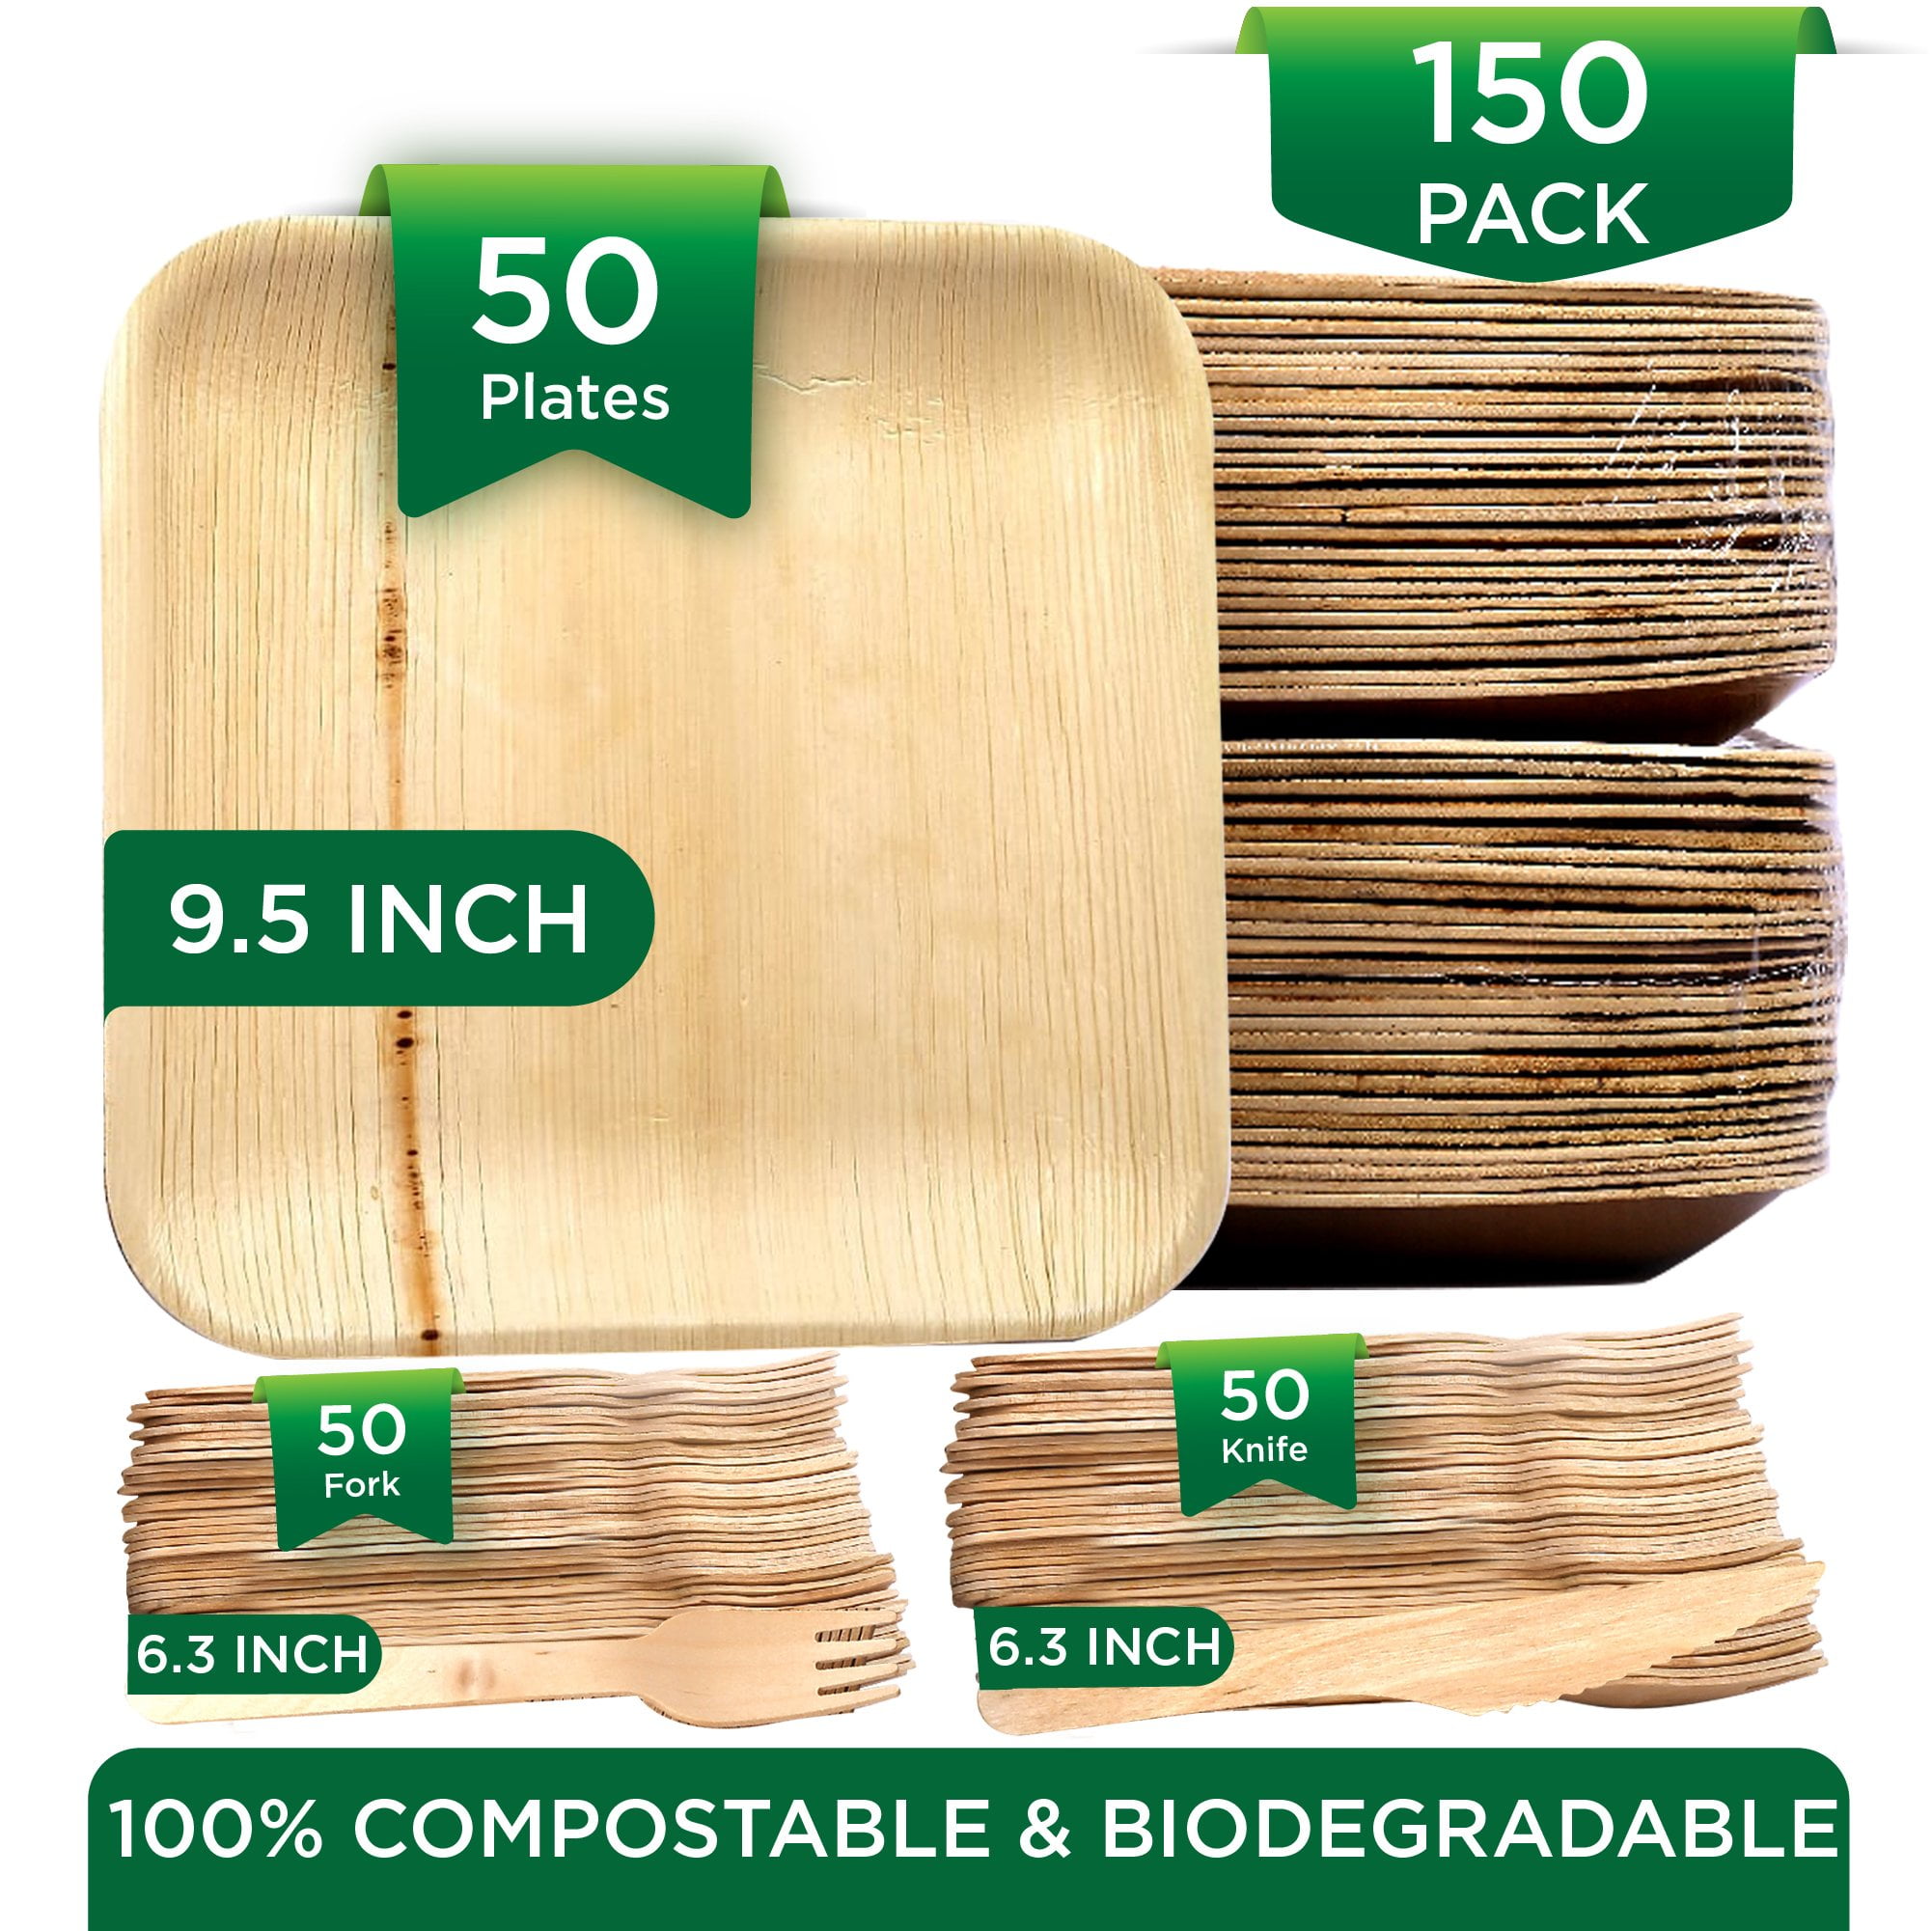 Bosnal 4 inch Square Plates, Compostable Palm Leaf, Bamboo and Wood Style, Stackable, Restaurant Grade, 25 Pcs - 9 Round Plate